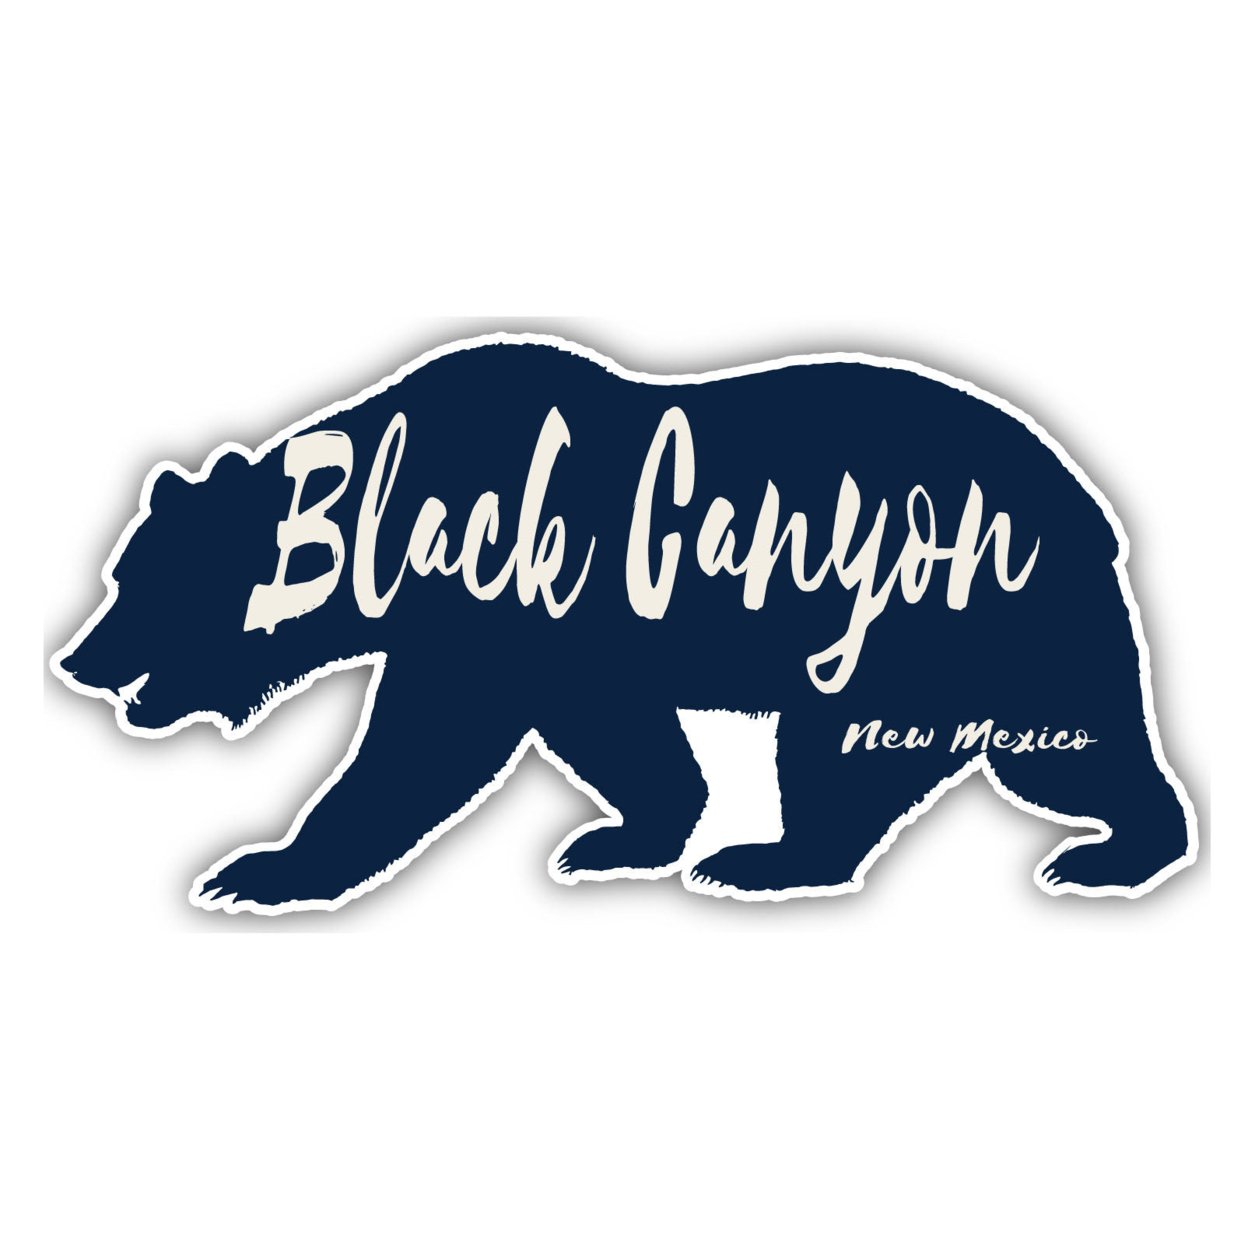 Black Canyon New Mexico Souvenir Decorative Stickers (Choose Theme And Size) - 4-Pack, 4-Inch, Bear